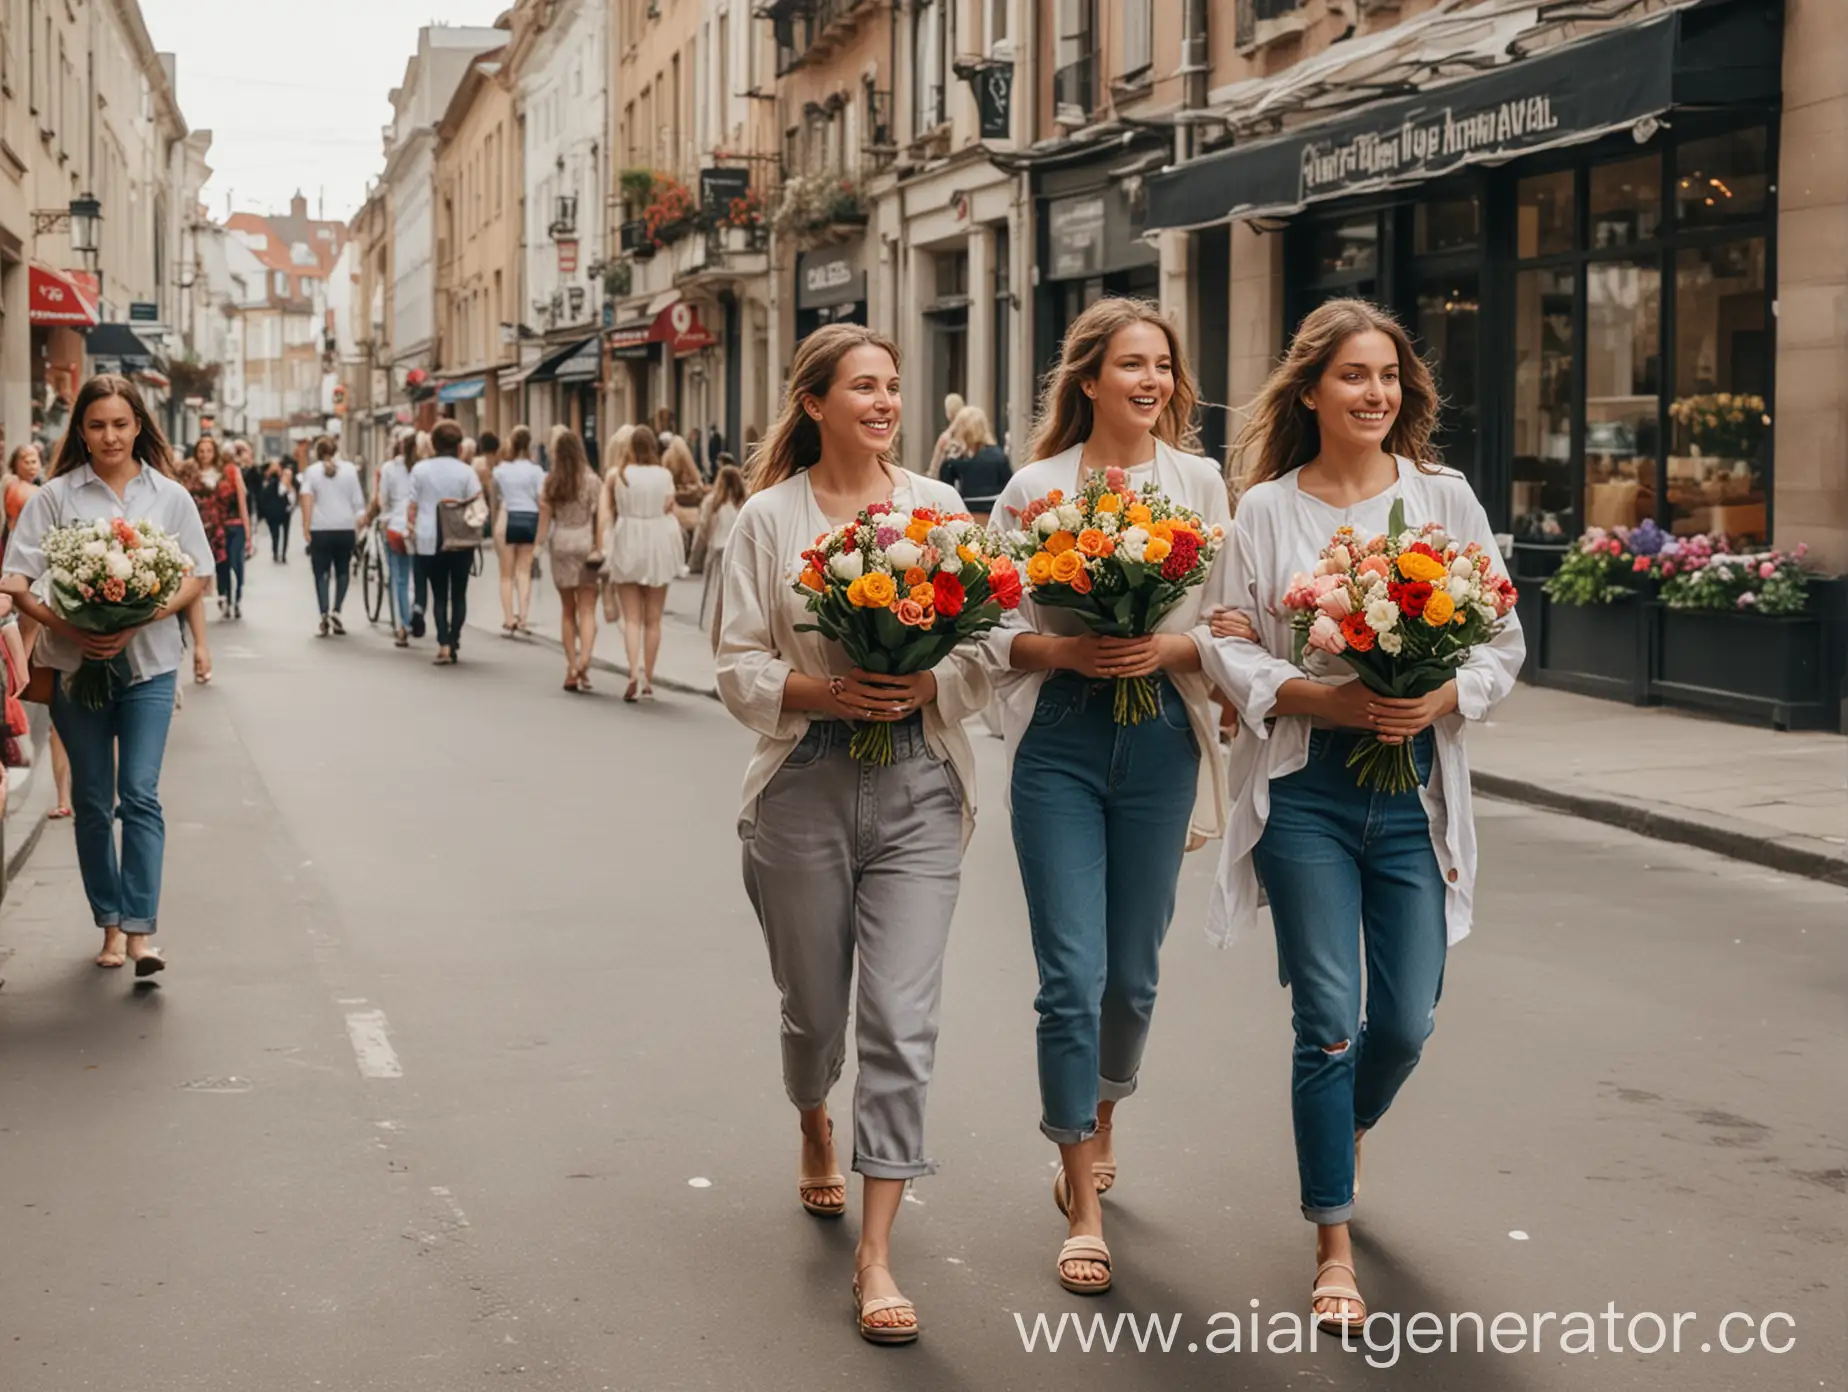 Women-Walking-with-Colorful-Flower-Bouquets